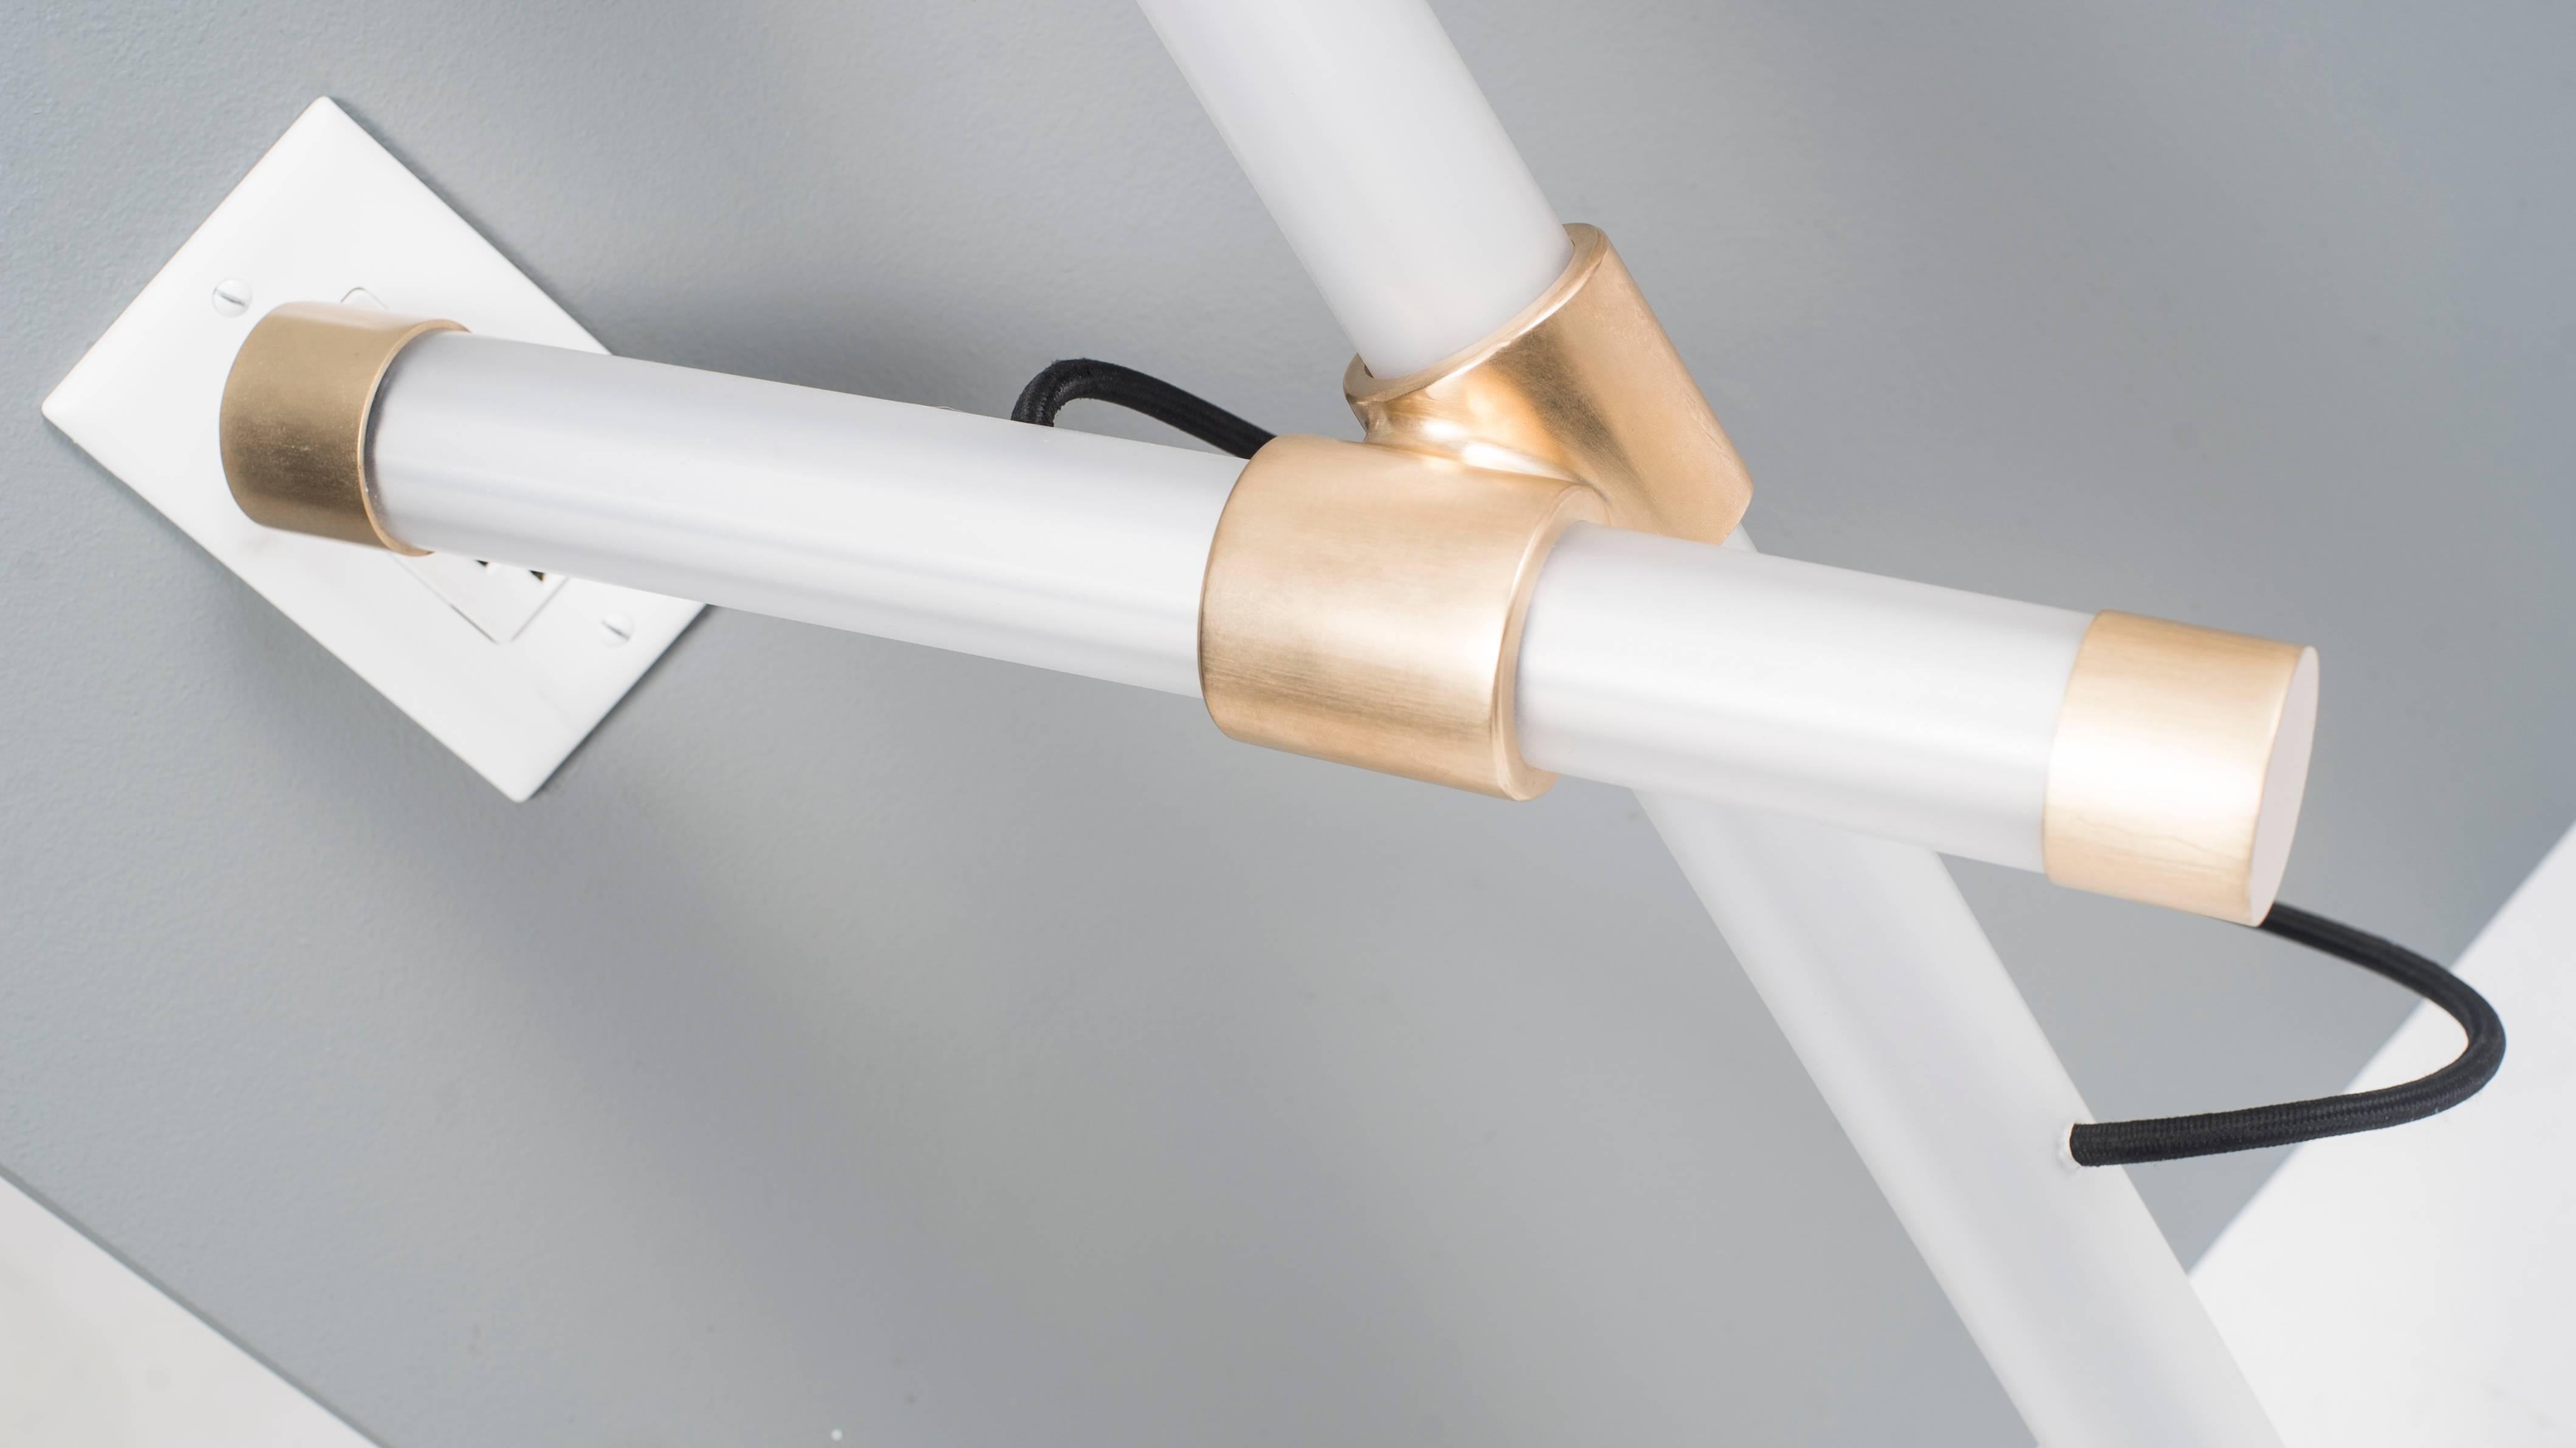 The Leaning Axis Light is a modular lighting fixture that plugs directly into a wall. The brushed brass connector holds each dimmable LED bulb in place while the handmade end caps keep the piece visually balanced. One can rotate the bulbs to adjust